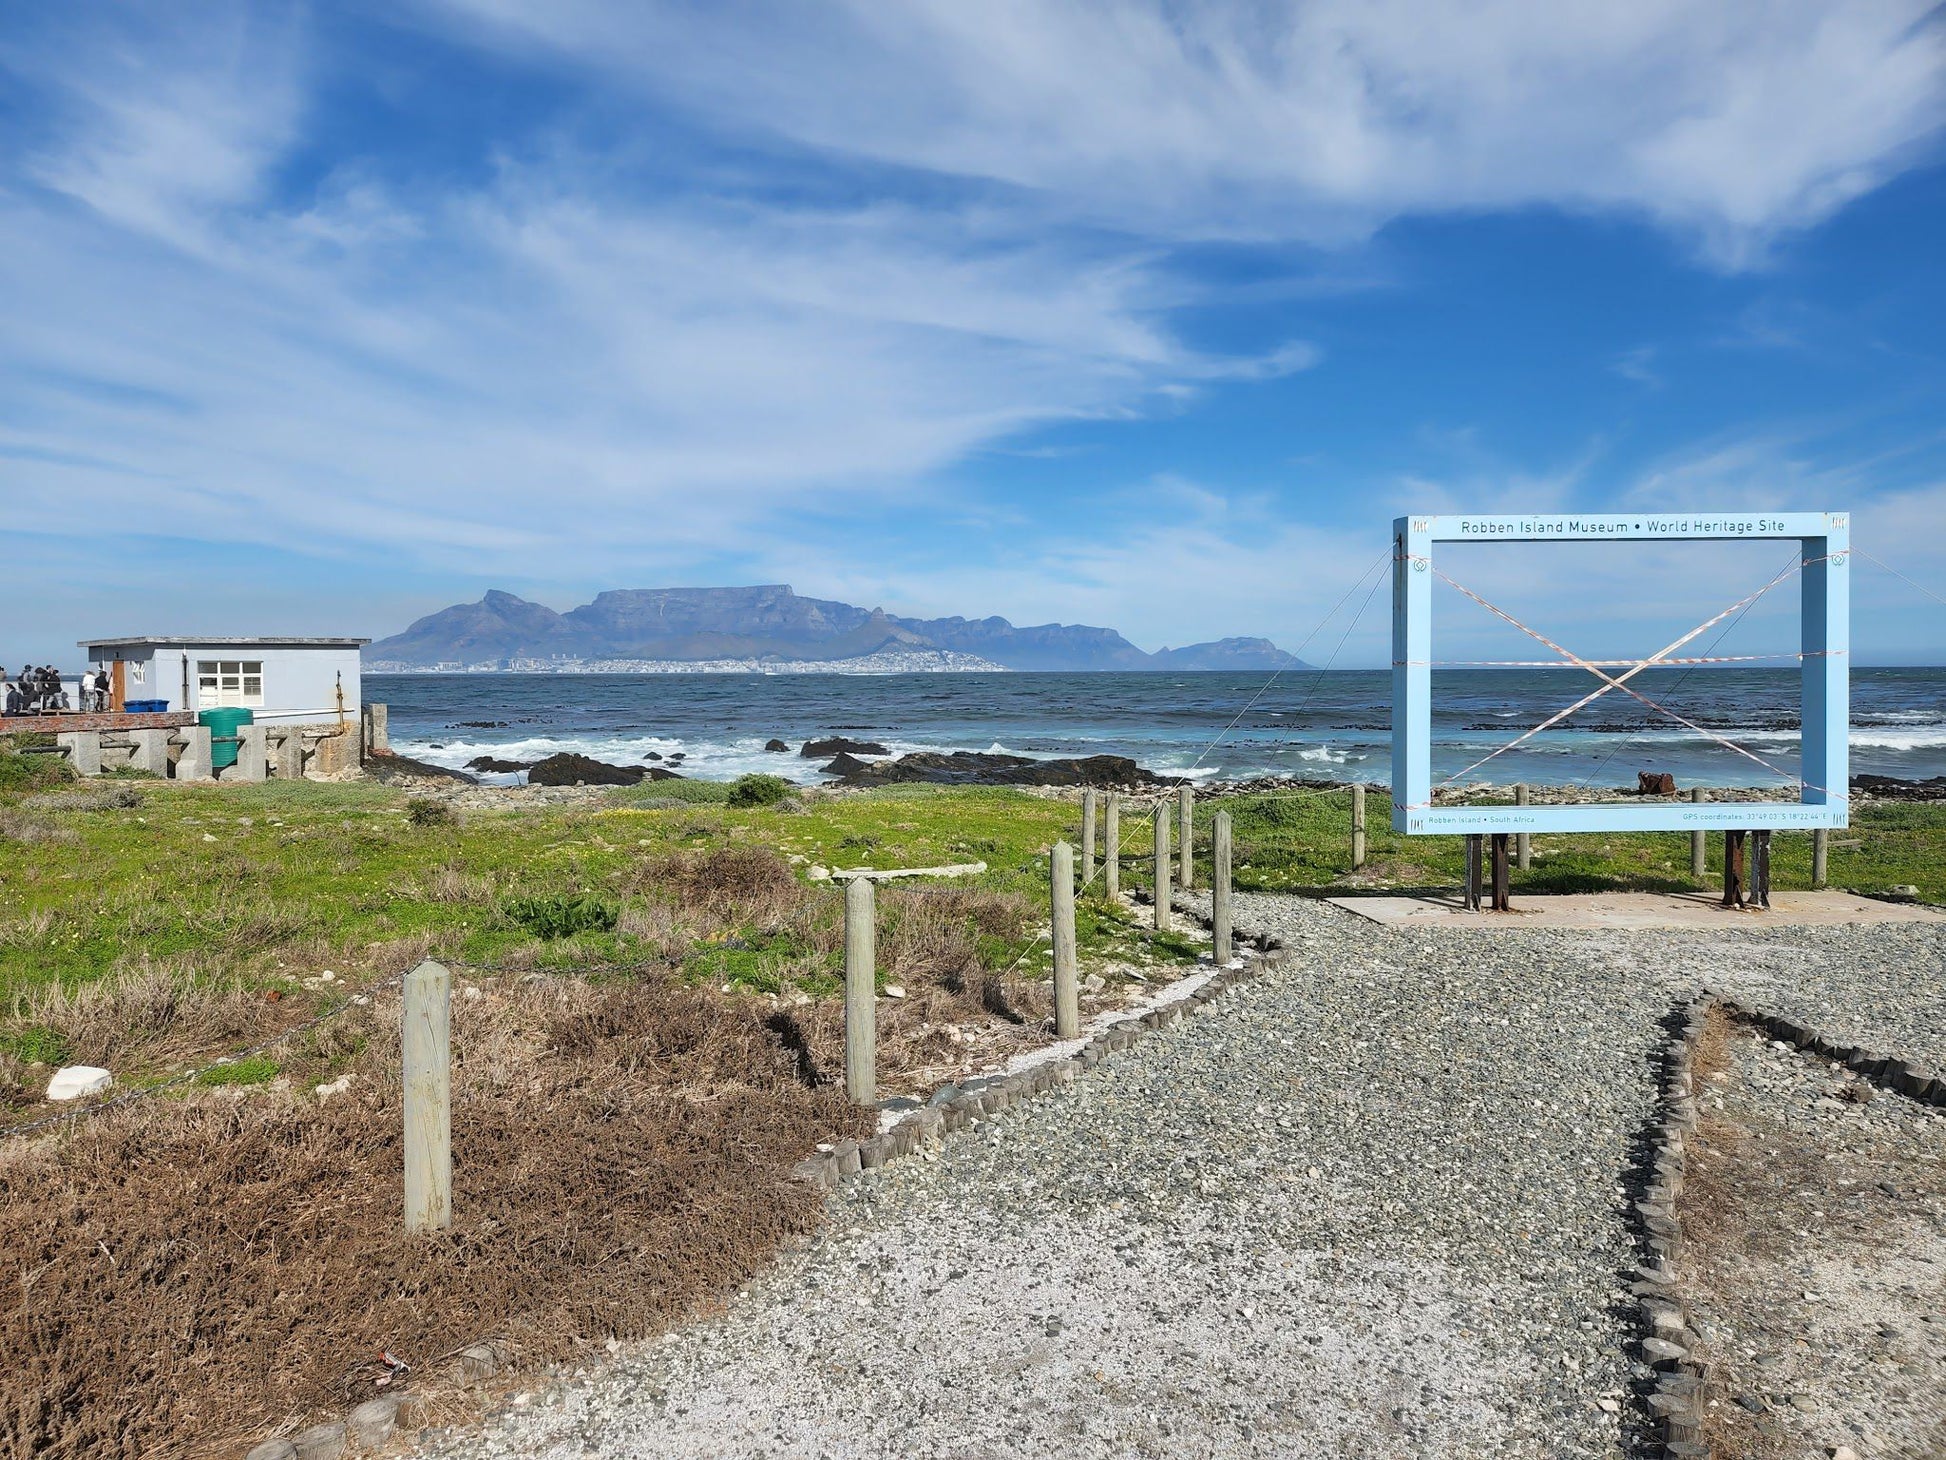  Robben Island viewing Point (looking toward Table Mountain)